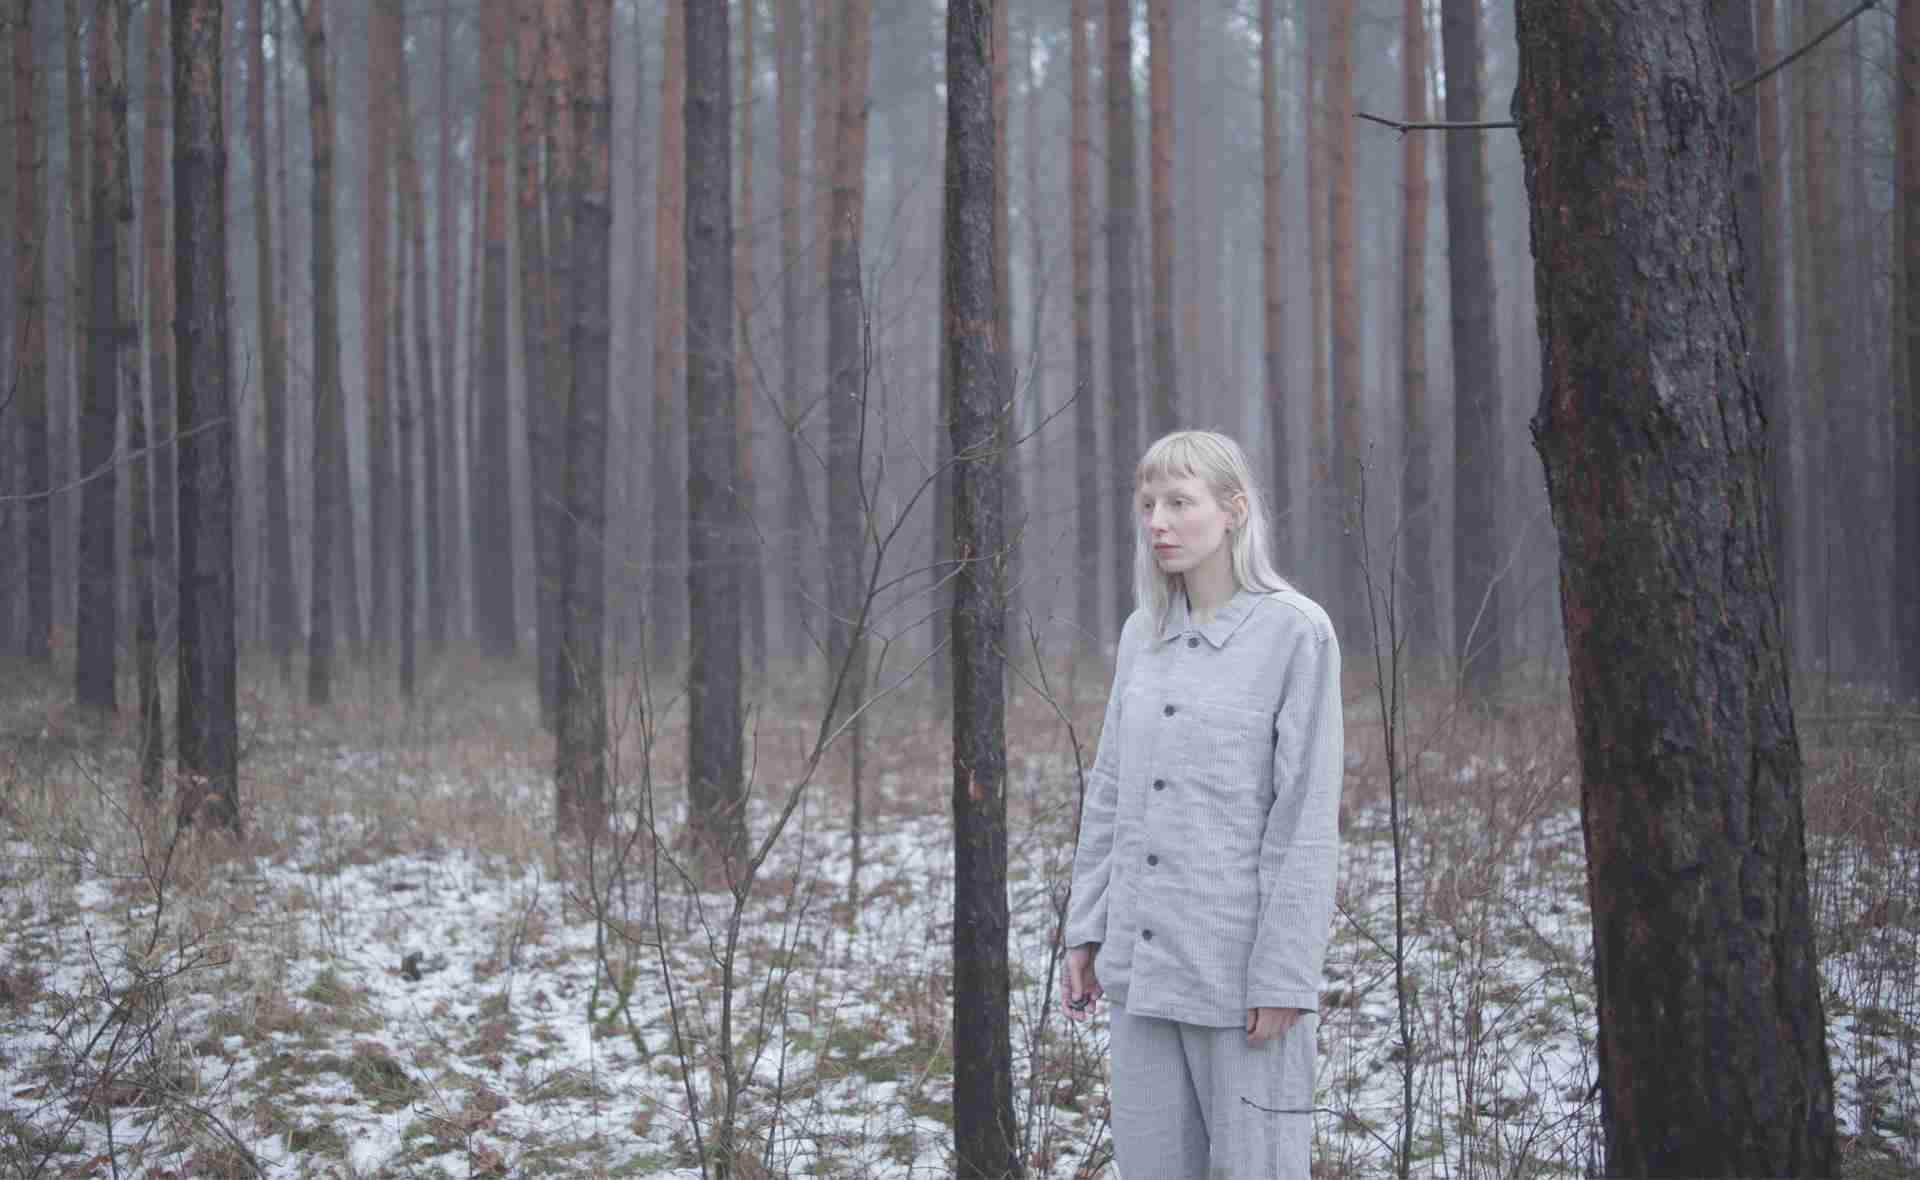 Still picture from Eszter Galambos's work "Between the trees" 